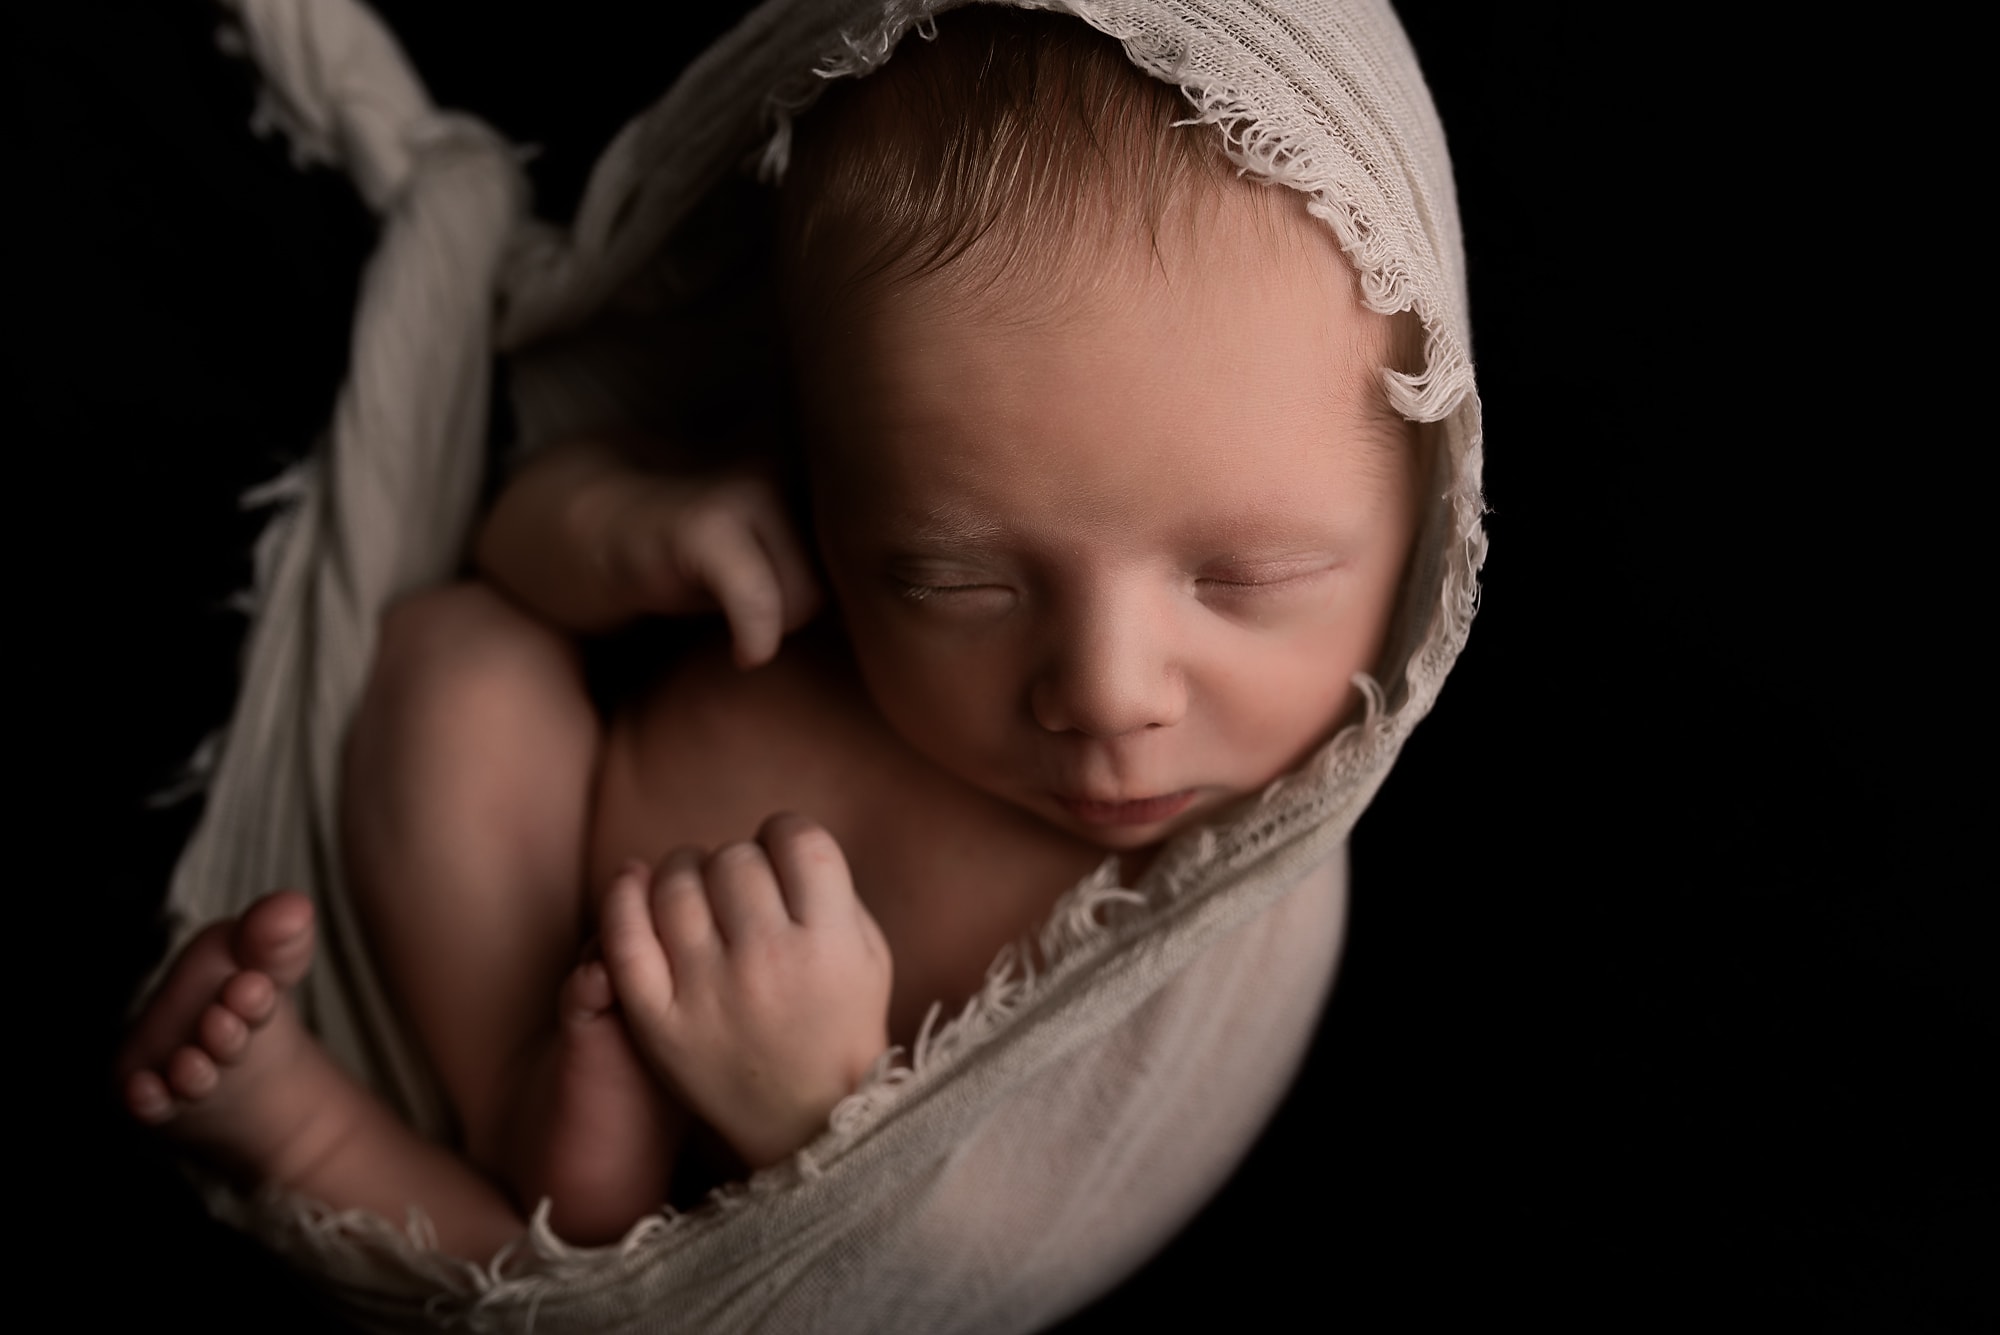 Preparing Your Newborn Baby for Their Portrait Session!